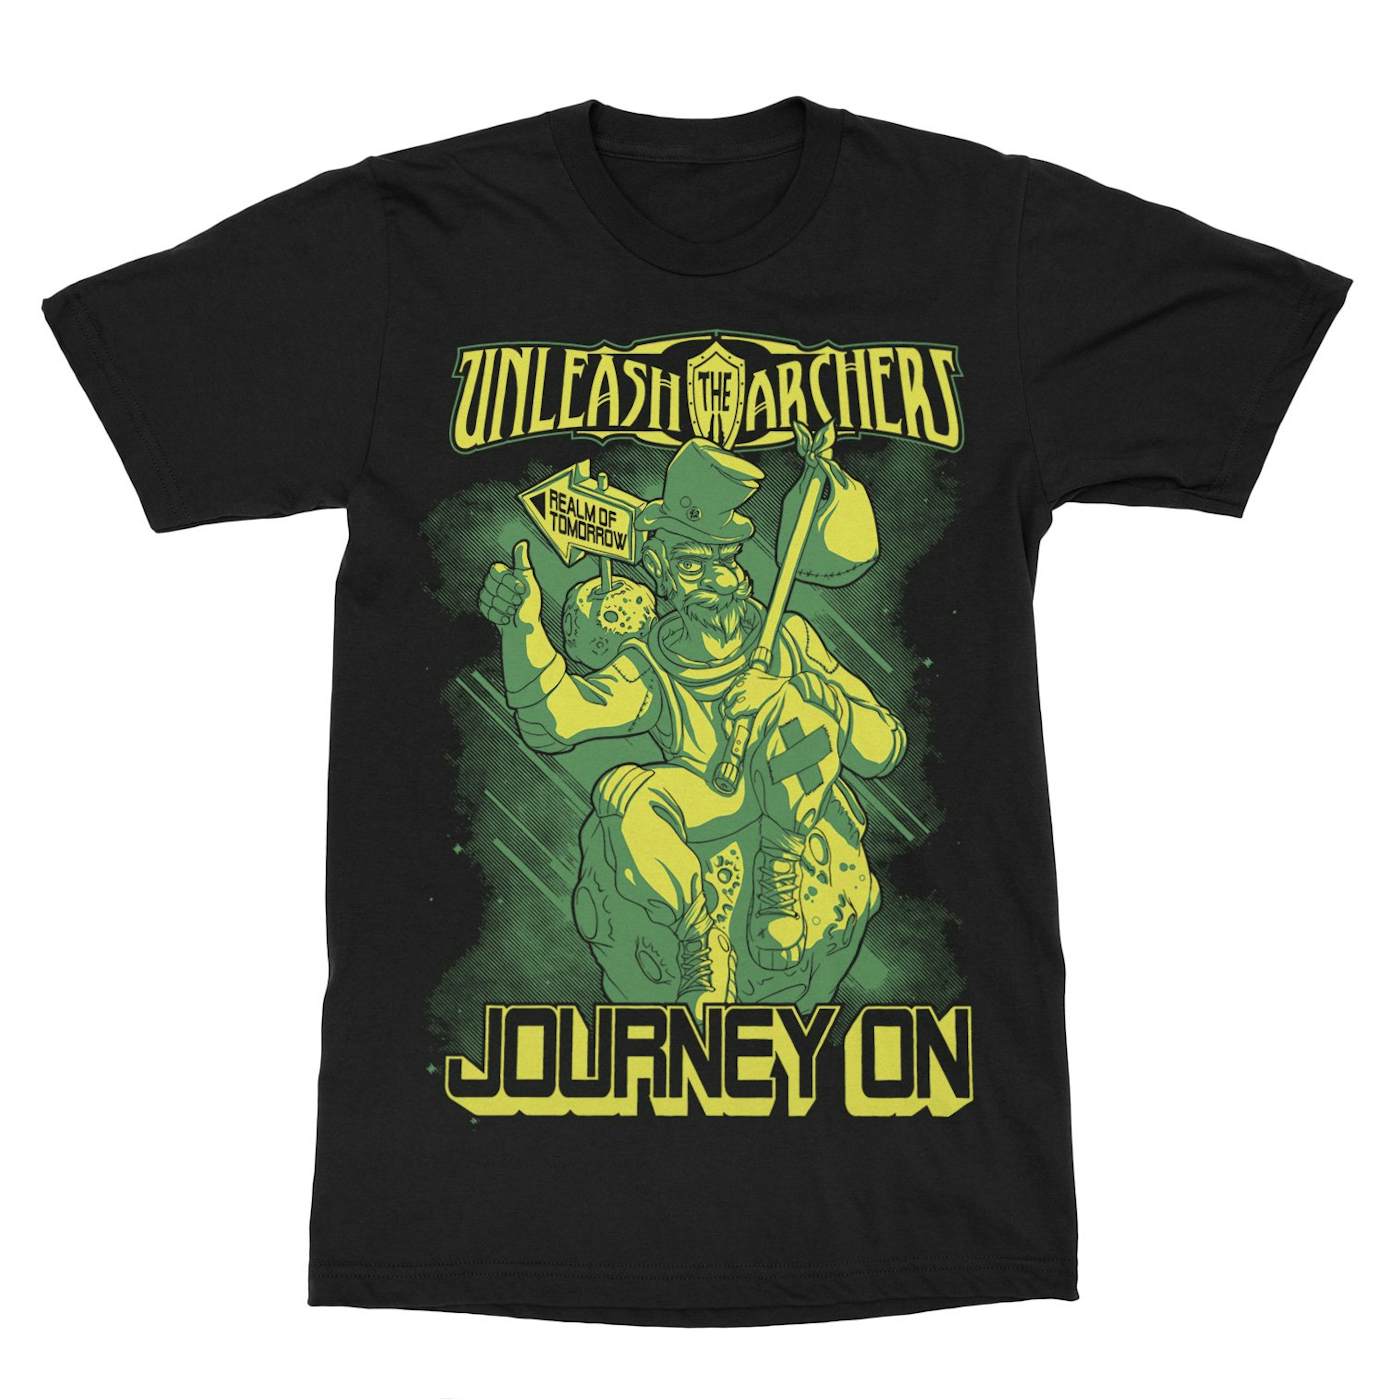 Unleash The Archers "Journey On" Limited Edition T-Shirt